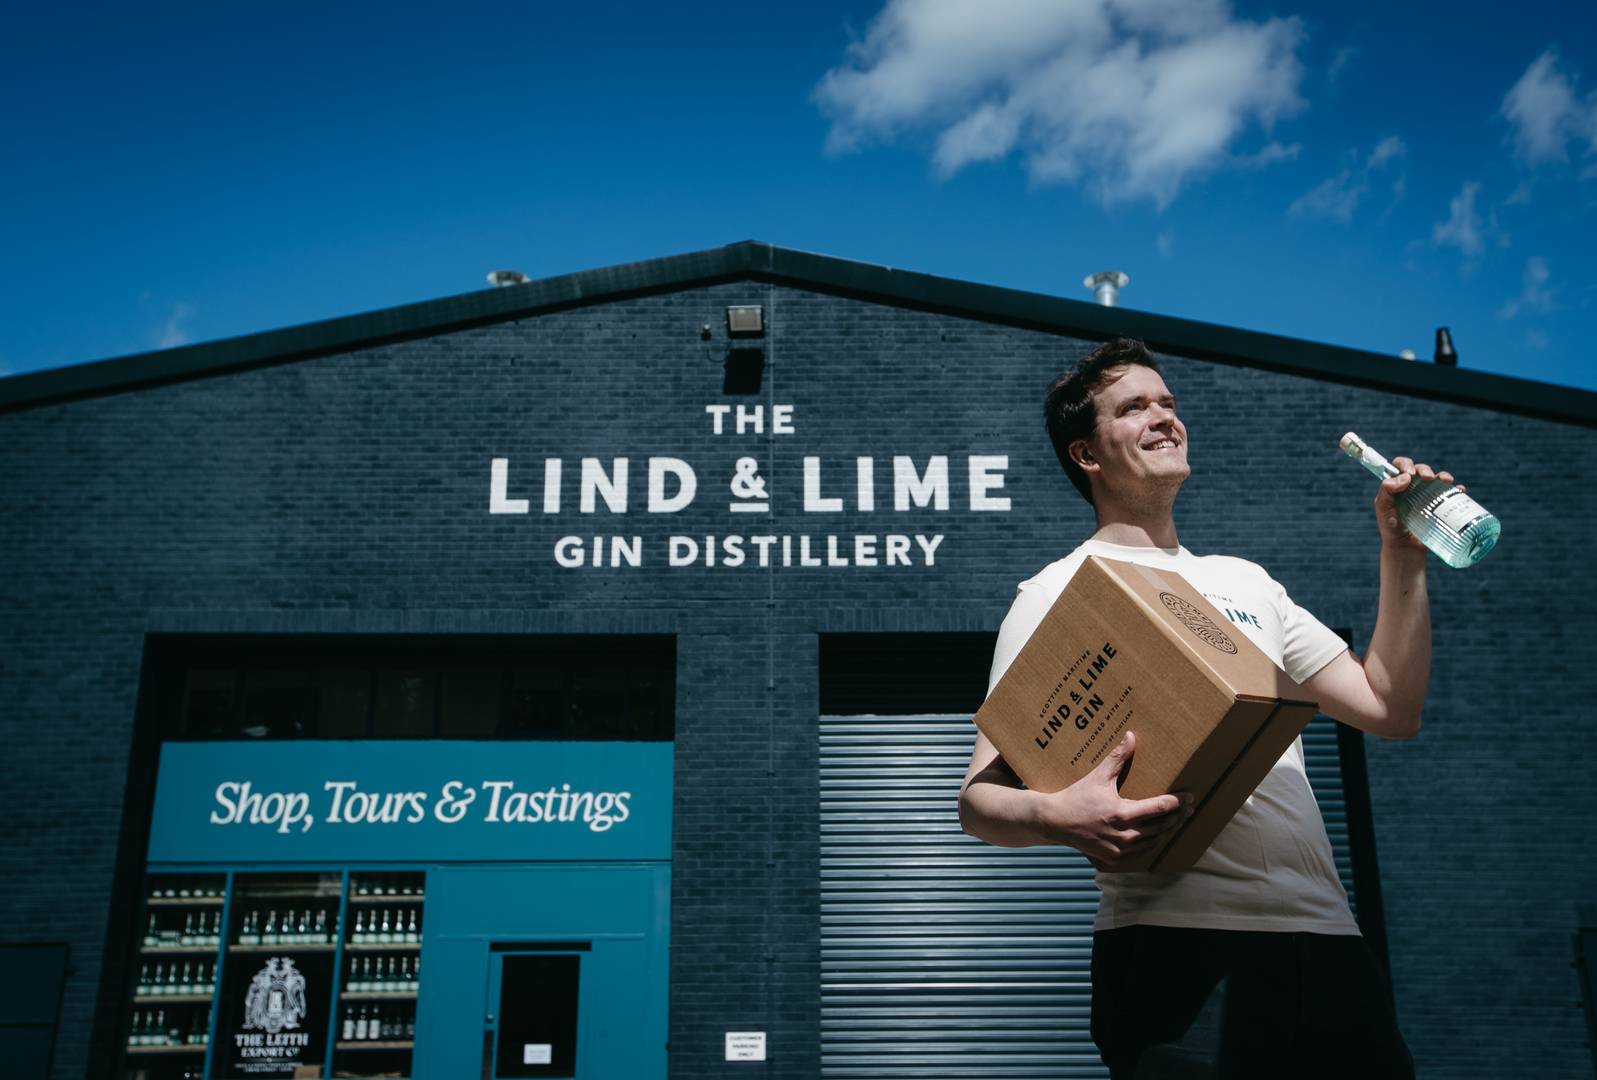 Lind & Lime Gin Distillery outside,© All Copyright Reserved